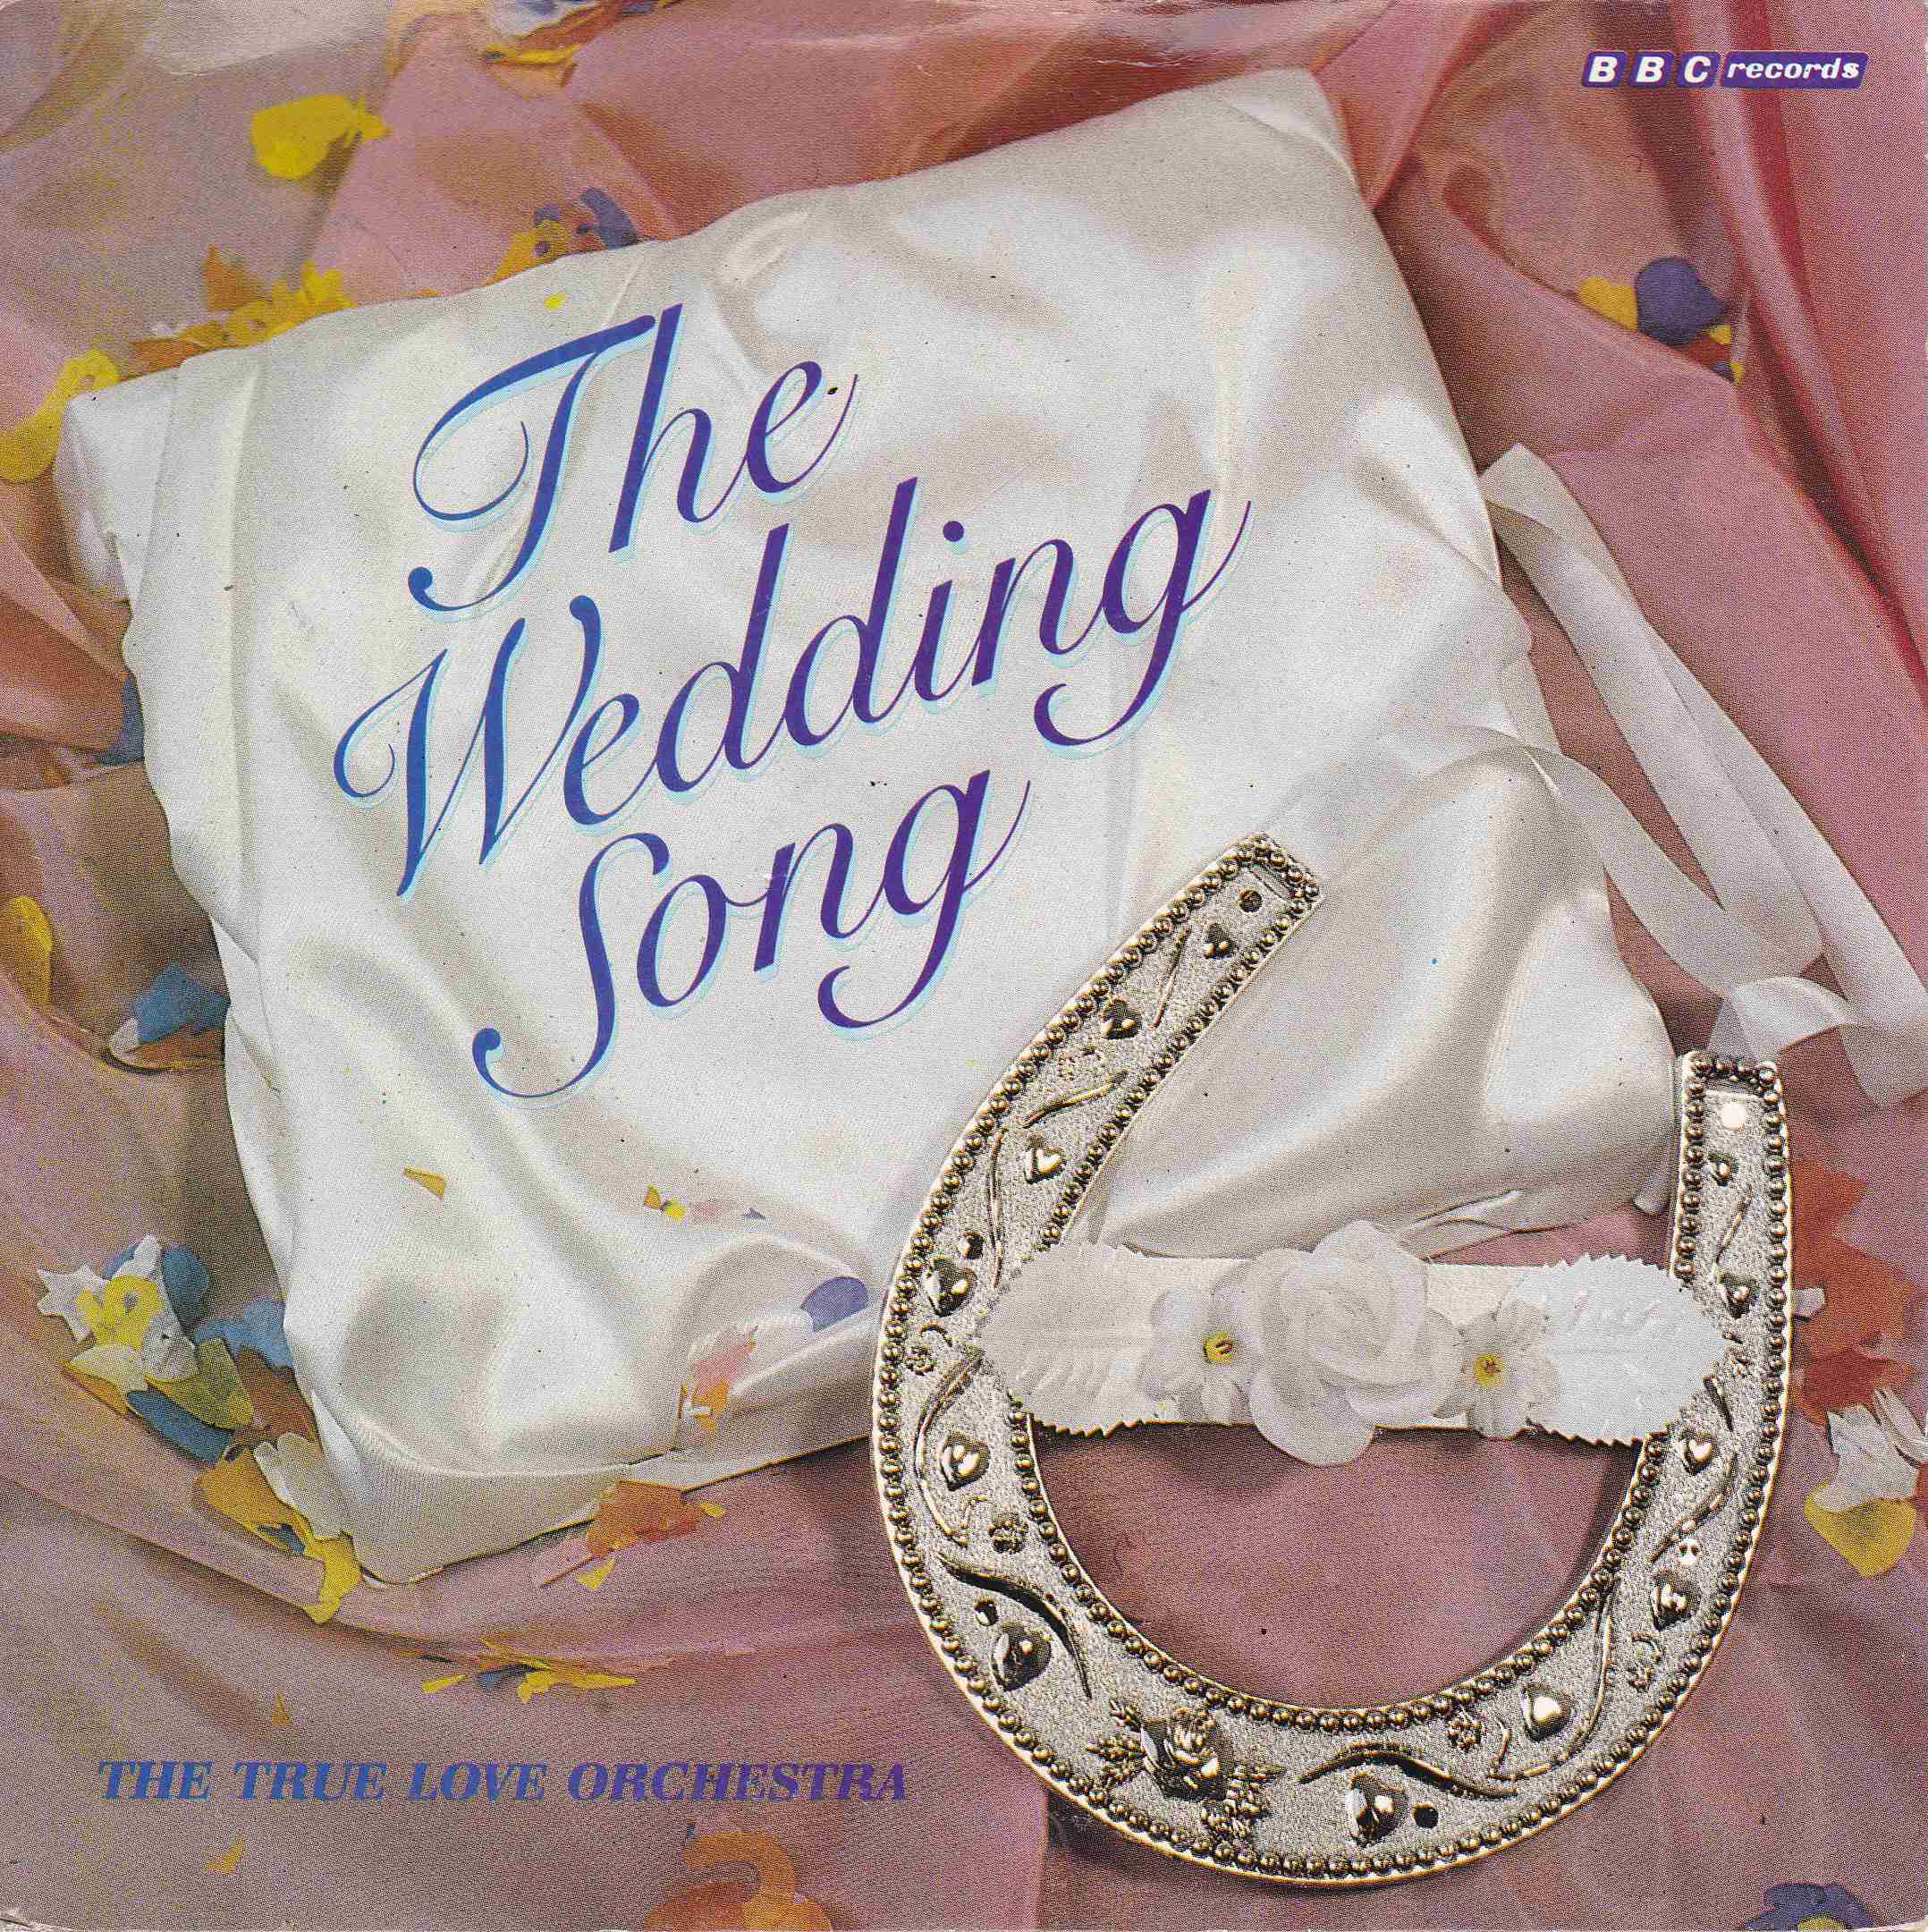 Picture of RESL 194 The wedding song by artist The True Love Orchestra from the BBC singles - Records and Tapes library